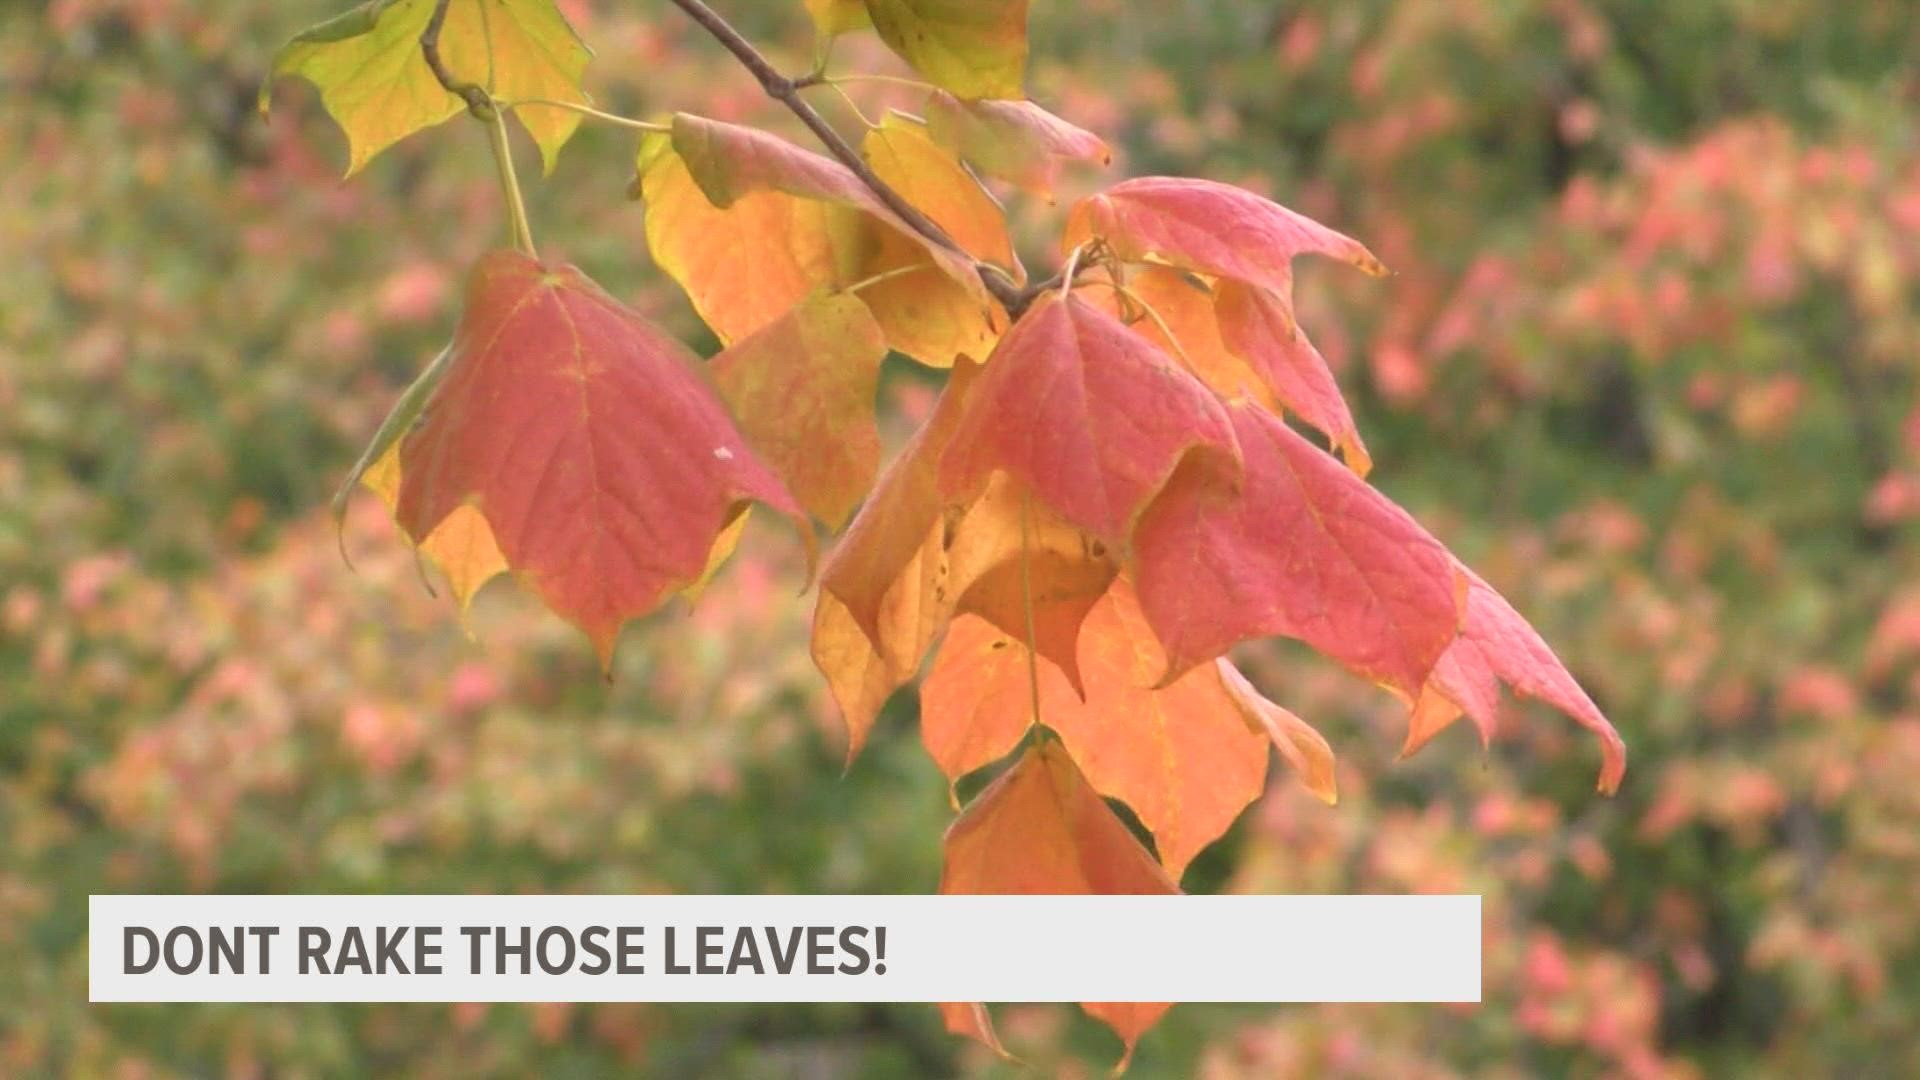 A late start to fall foliage means leaves will be coming down quickly over the next couple weeks. Experts say you can use them as natural fertilizer.